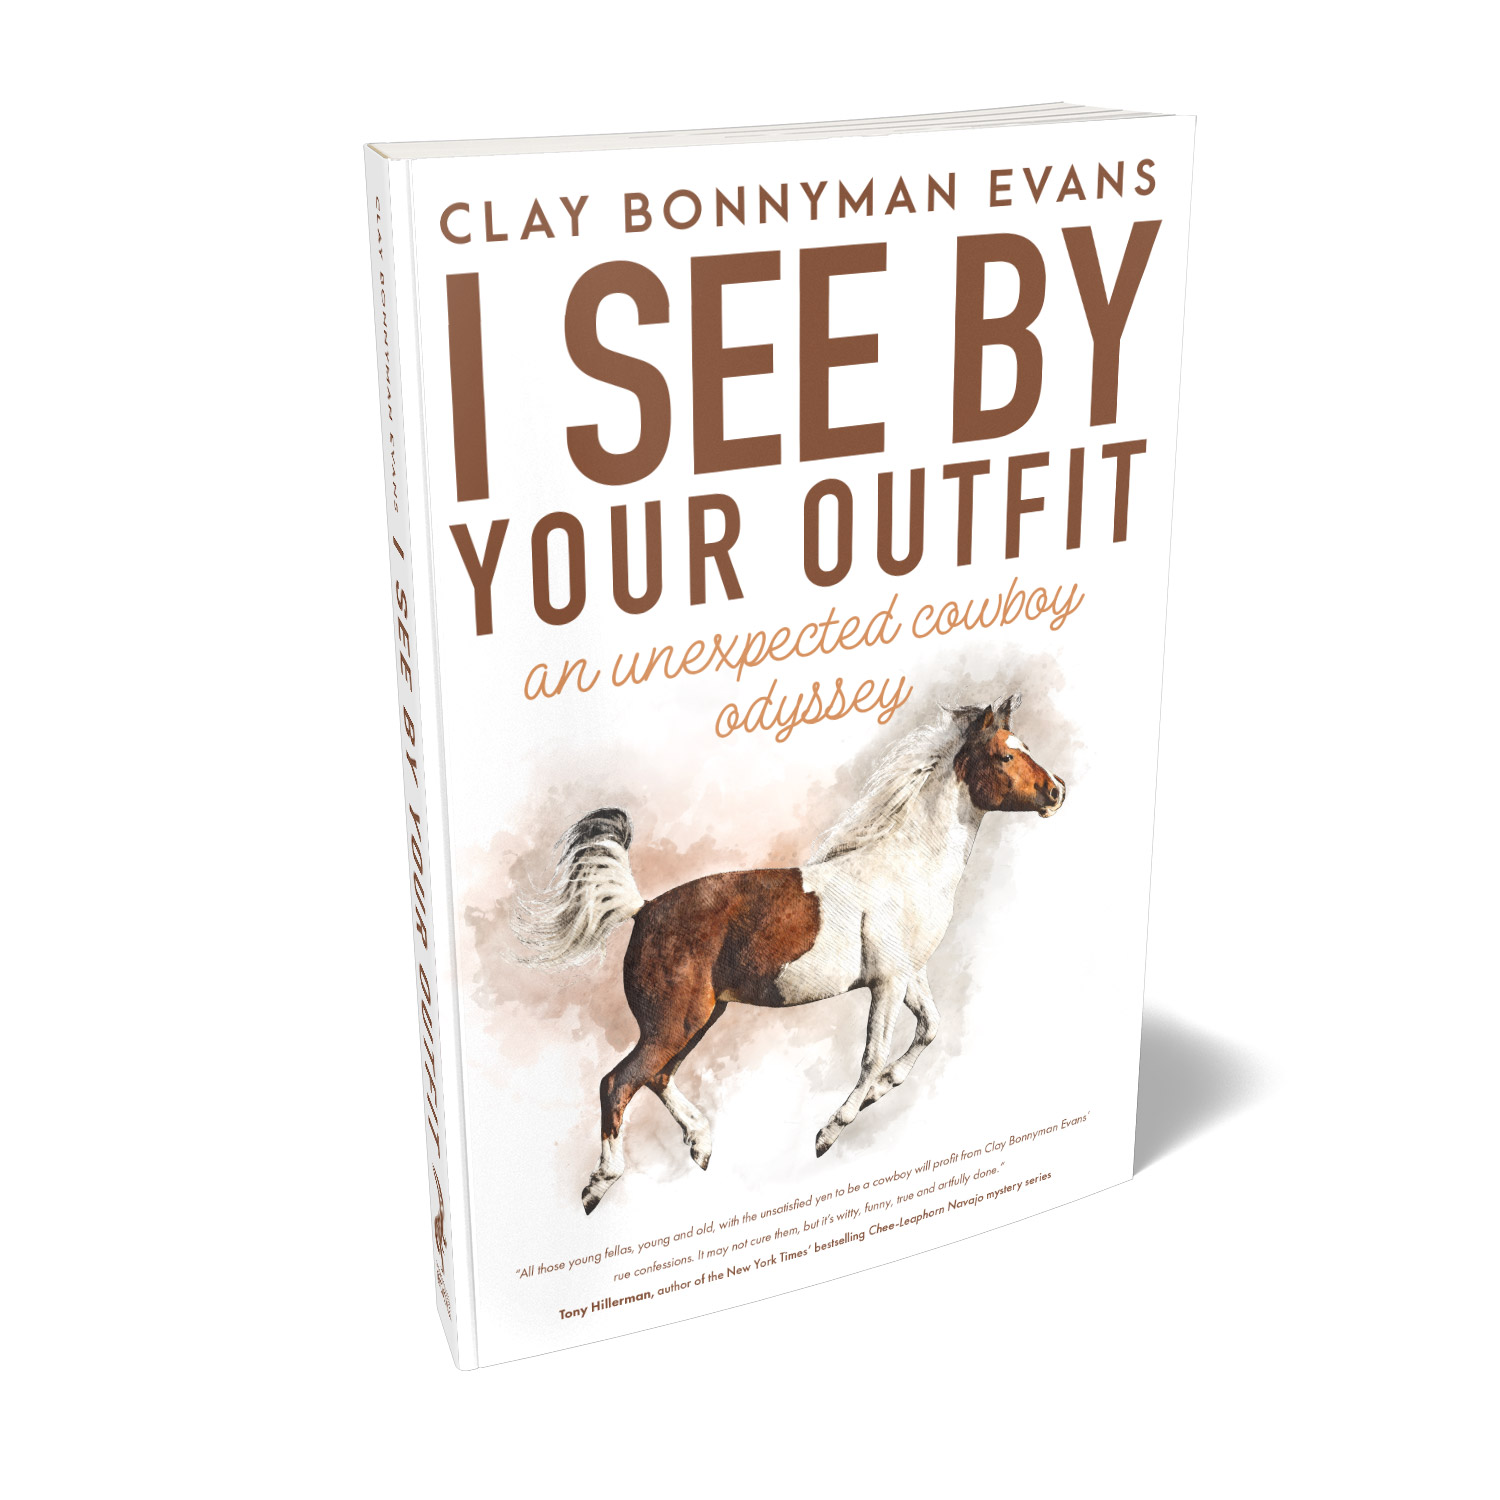 'I See By Your Outfit'' is modern cowboy memoir, reflecting on life and times on the trail in the 1980s. The author is Clay Bonnyman Evans. The book cover design and interior formatting are by Mark Thomas. To learn more about what Mark could do for your book, please visit coverness.com